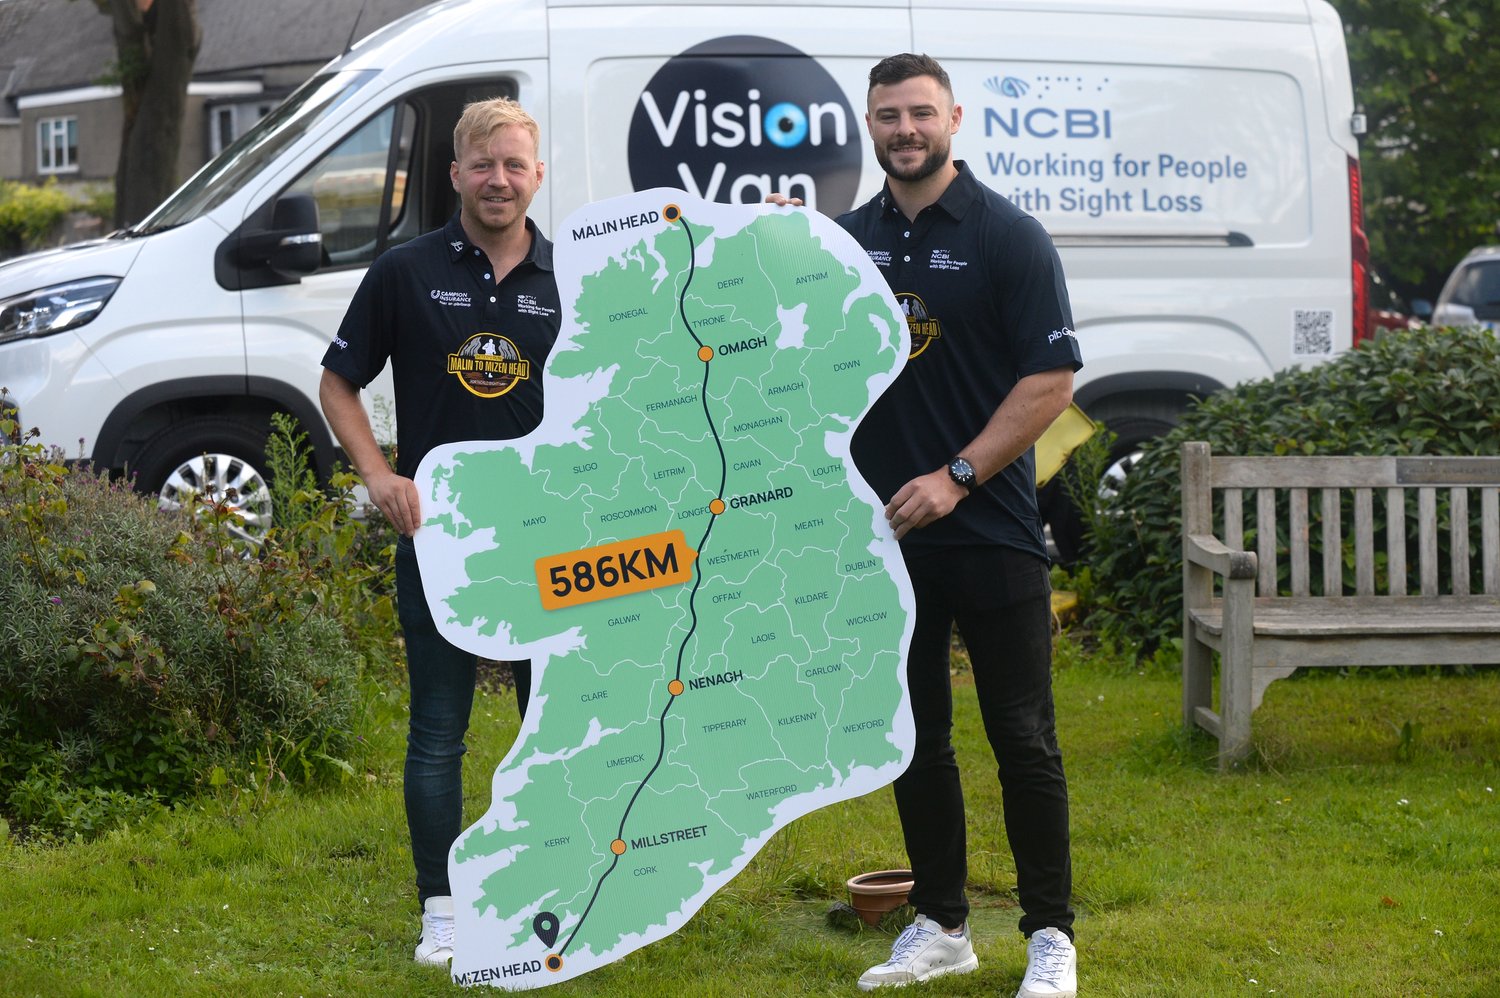 image of Peter Ryan with Robbie Henshaw standing in front of the vision van holding the map